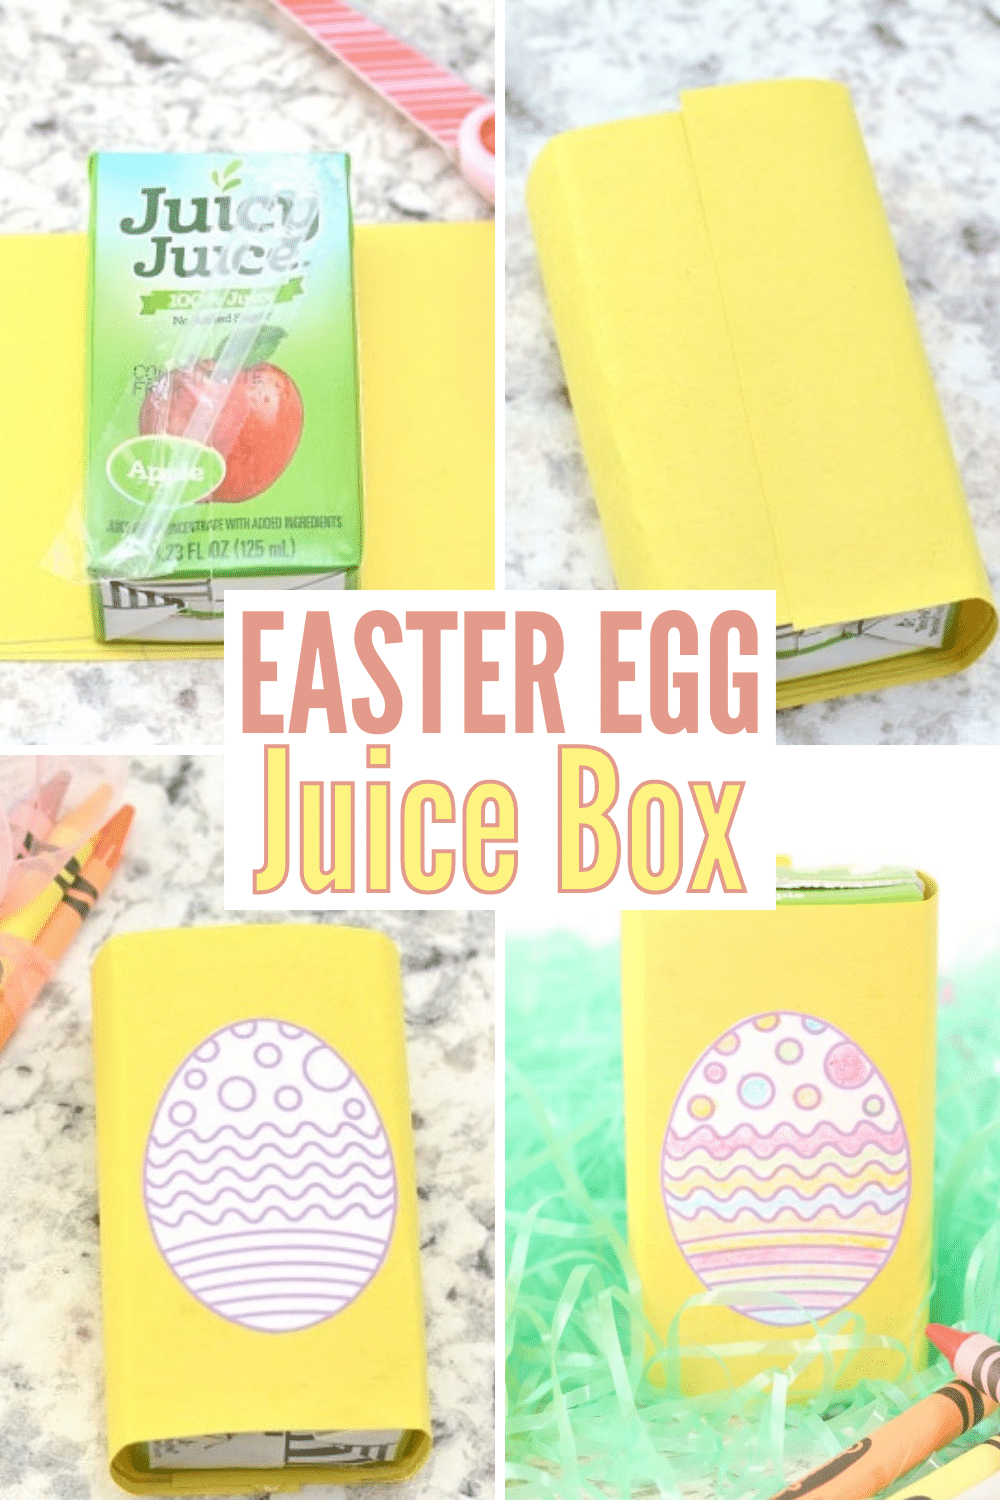 Turn snack time into fun time this Easter with this super easy craft. This Easter egg juice box is a fun addition to your child's Easter basket, lunchbox or class party! #easter #funfoodforkids #easycrafts via @wondermomwannab